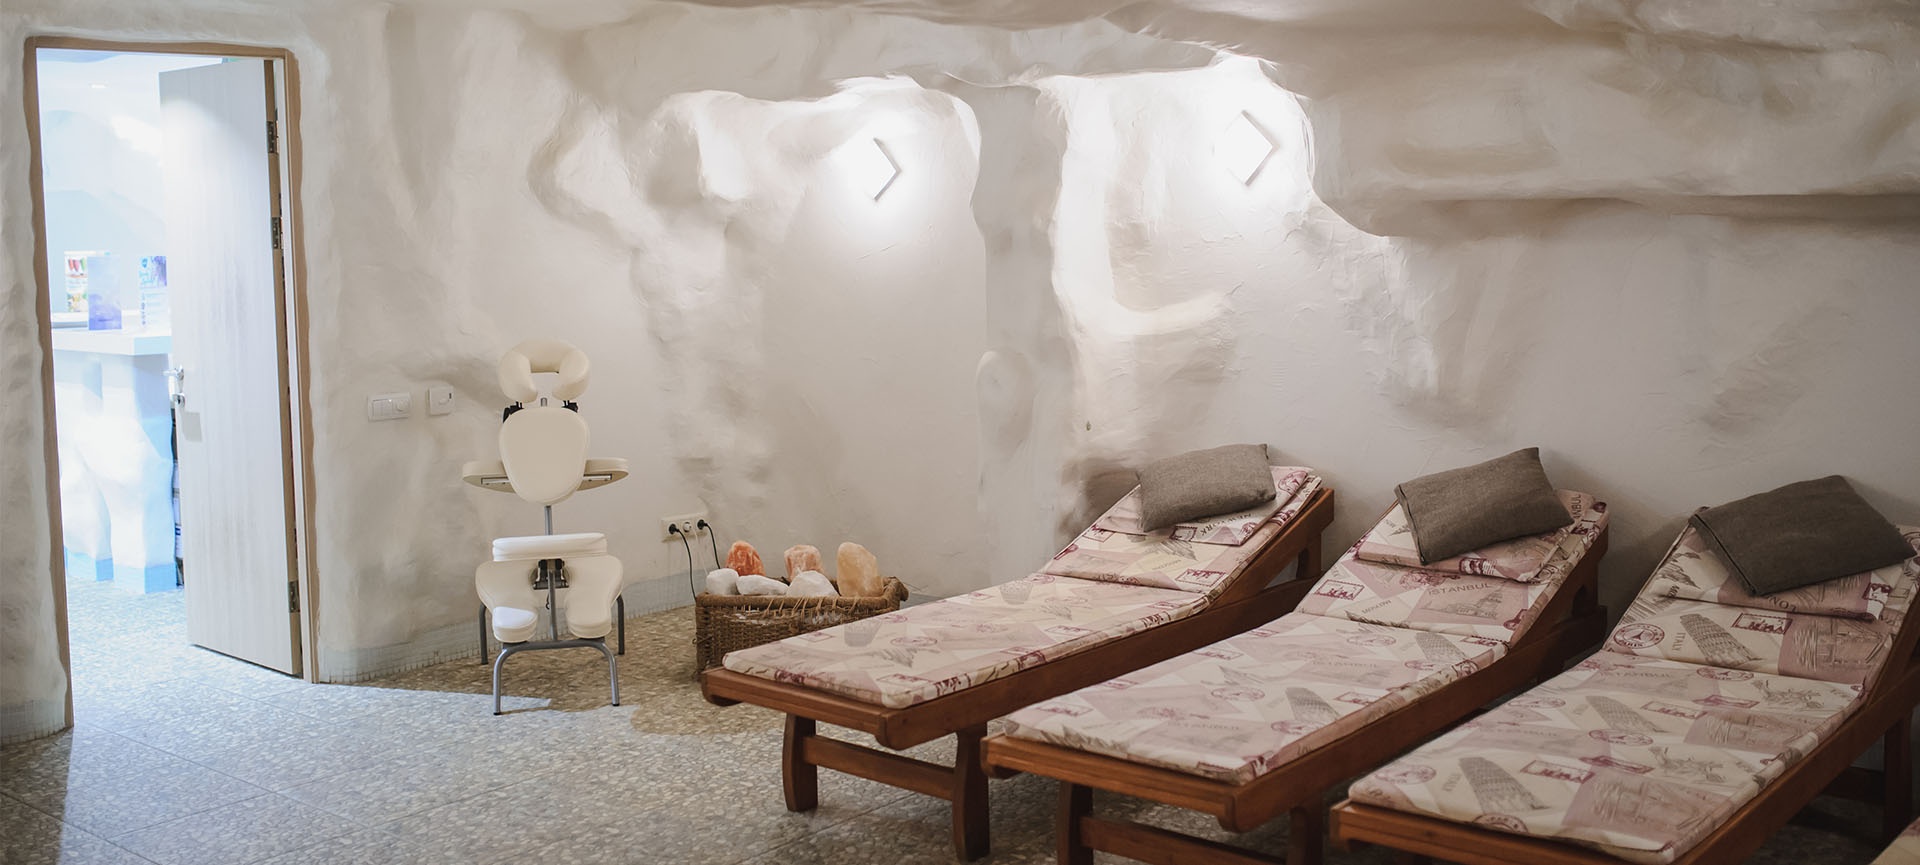 benefits of salt room therapy